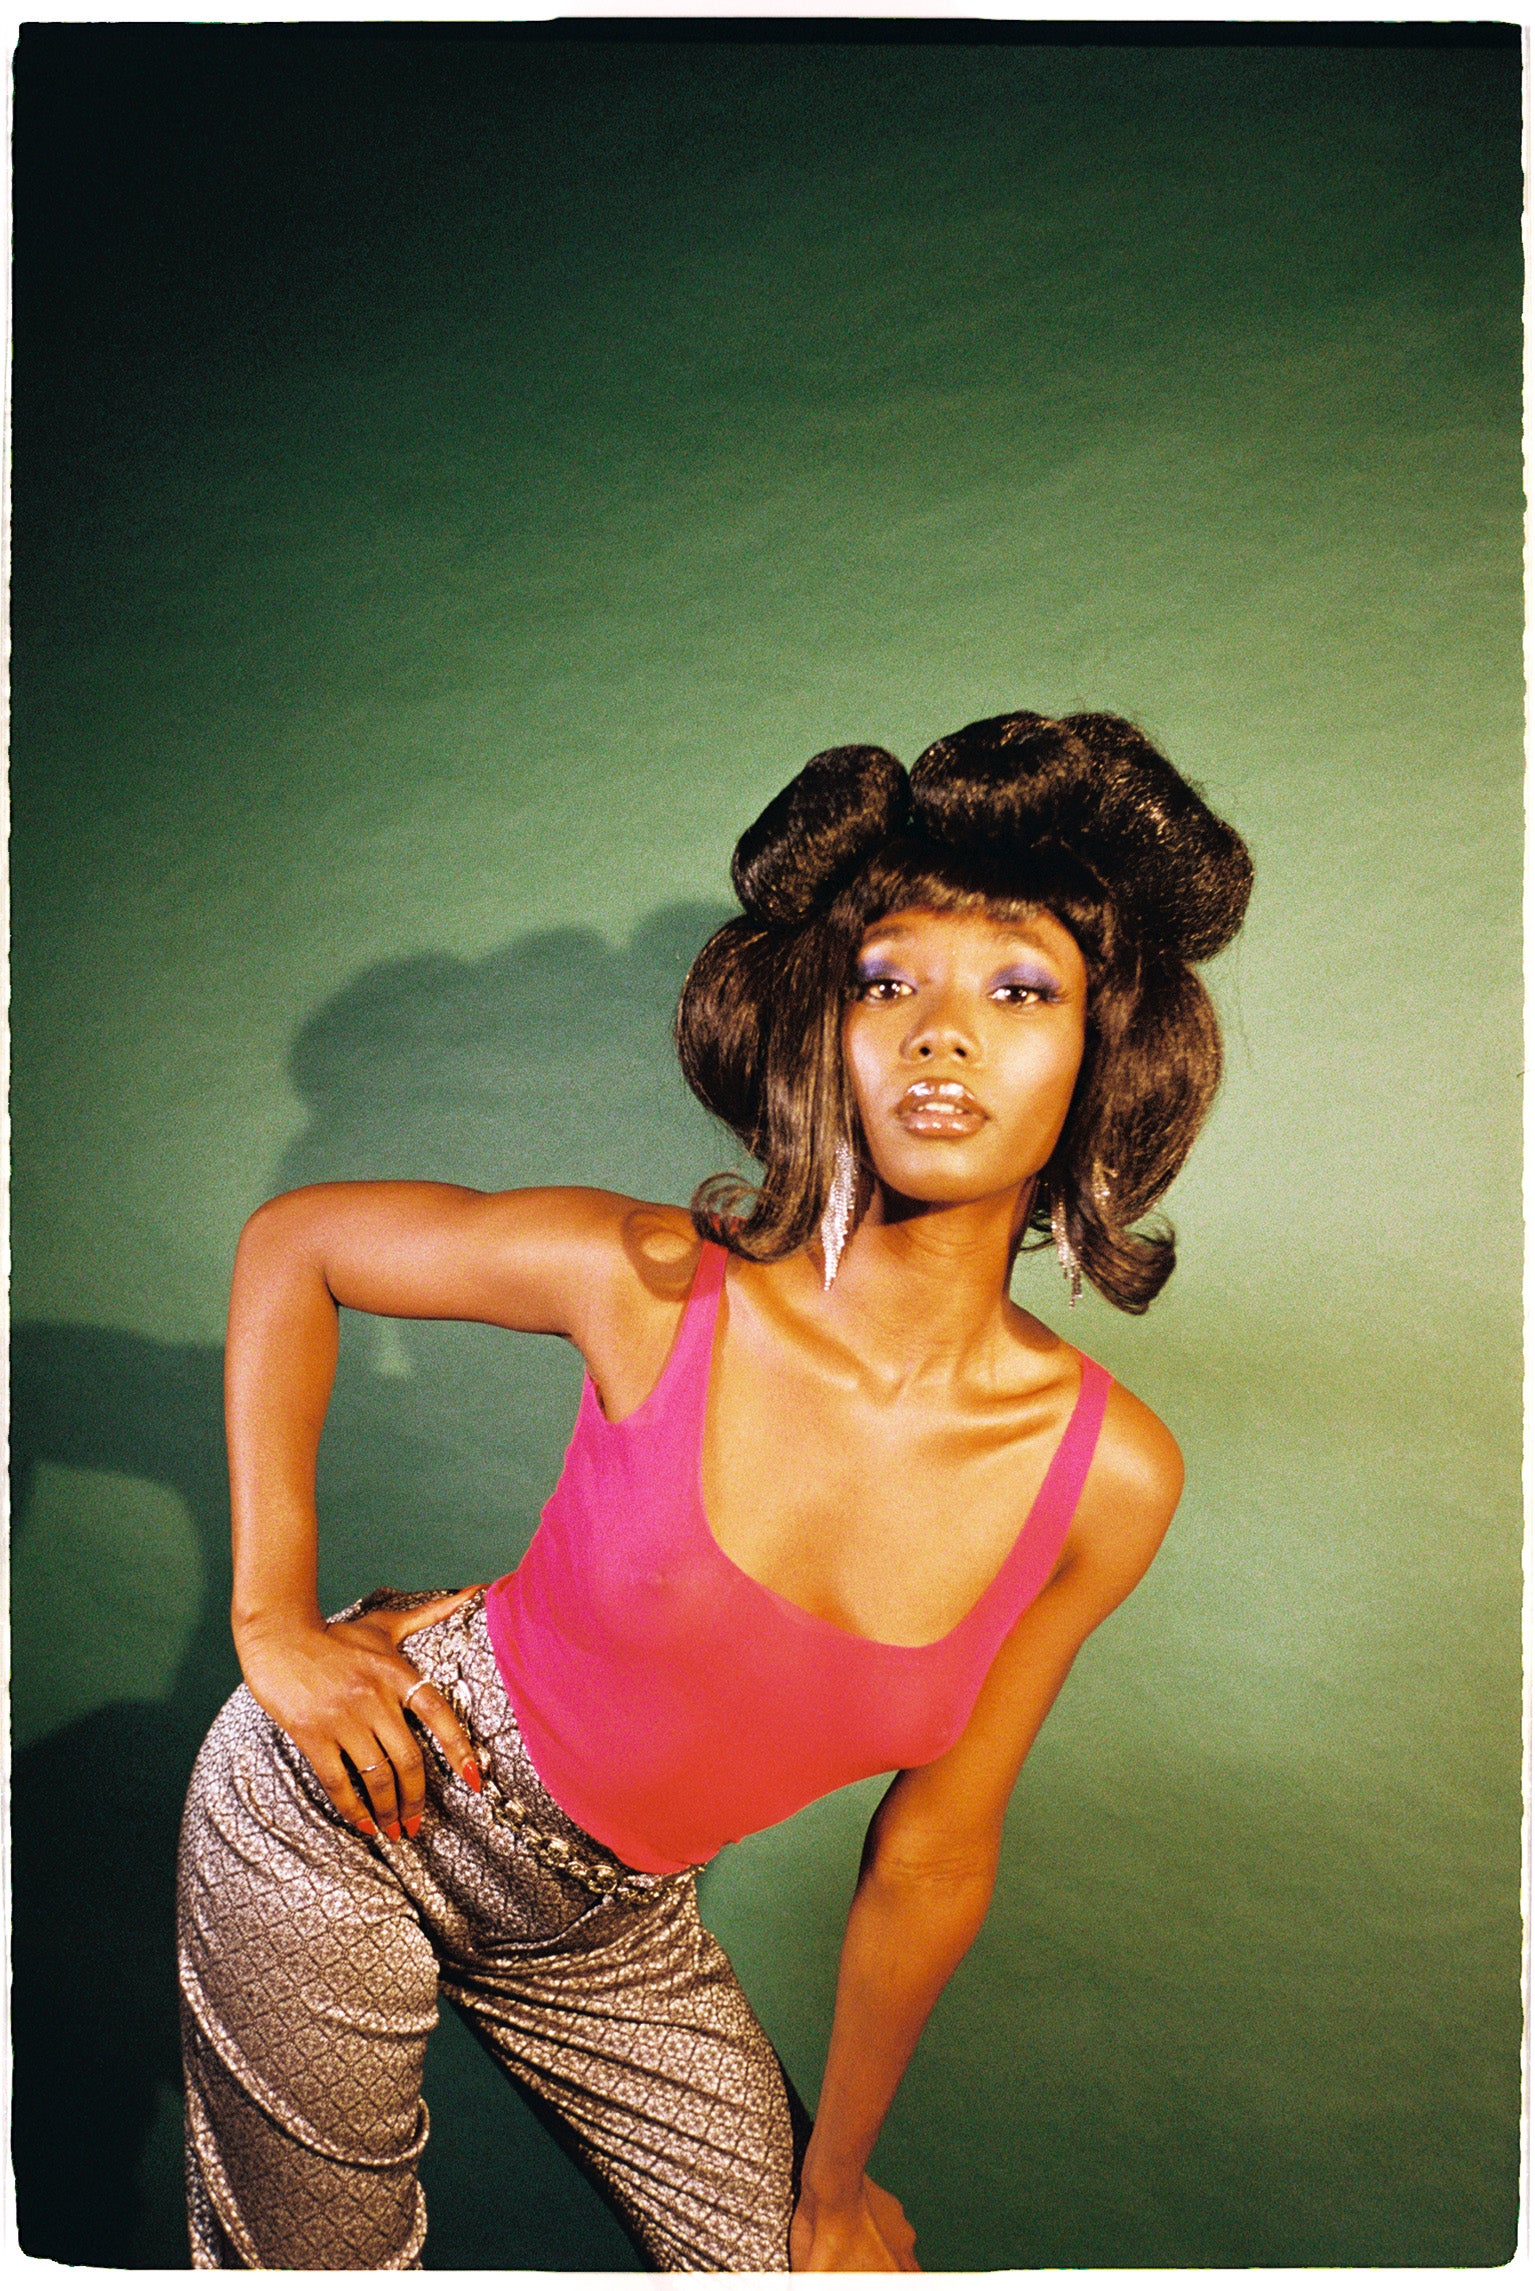 This Eye-Catching Editorial Highlights Black and Latin Women Artists In New York City